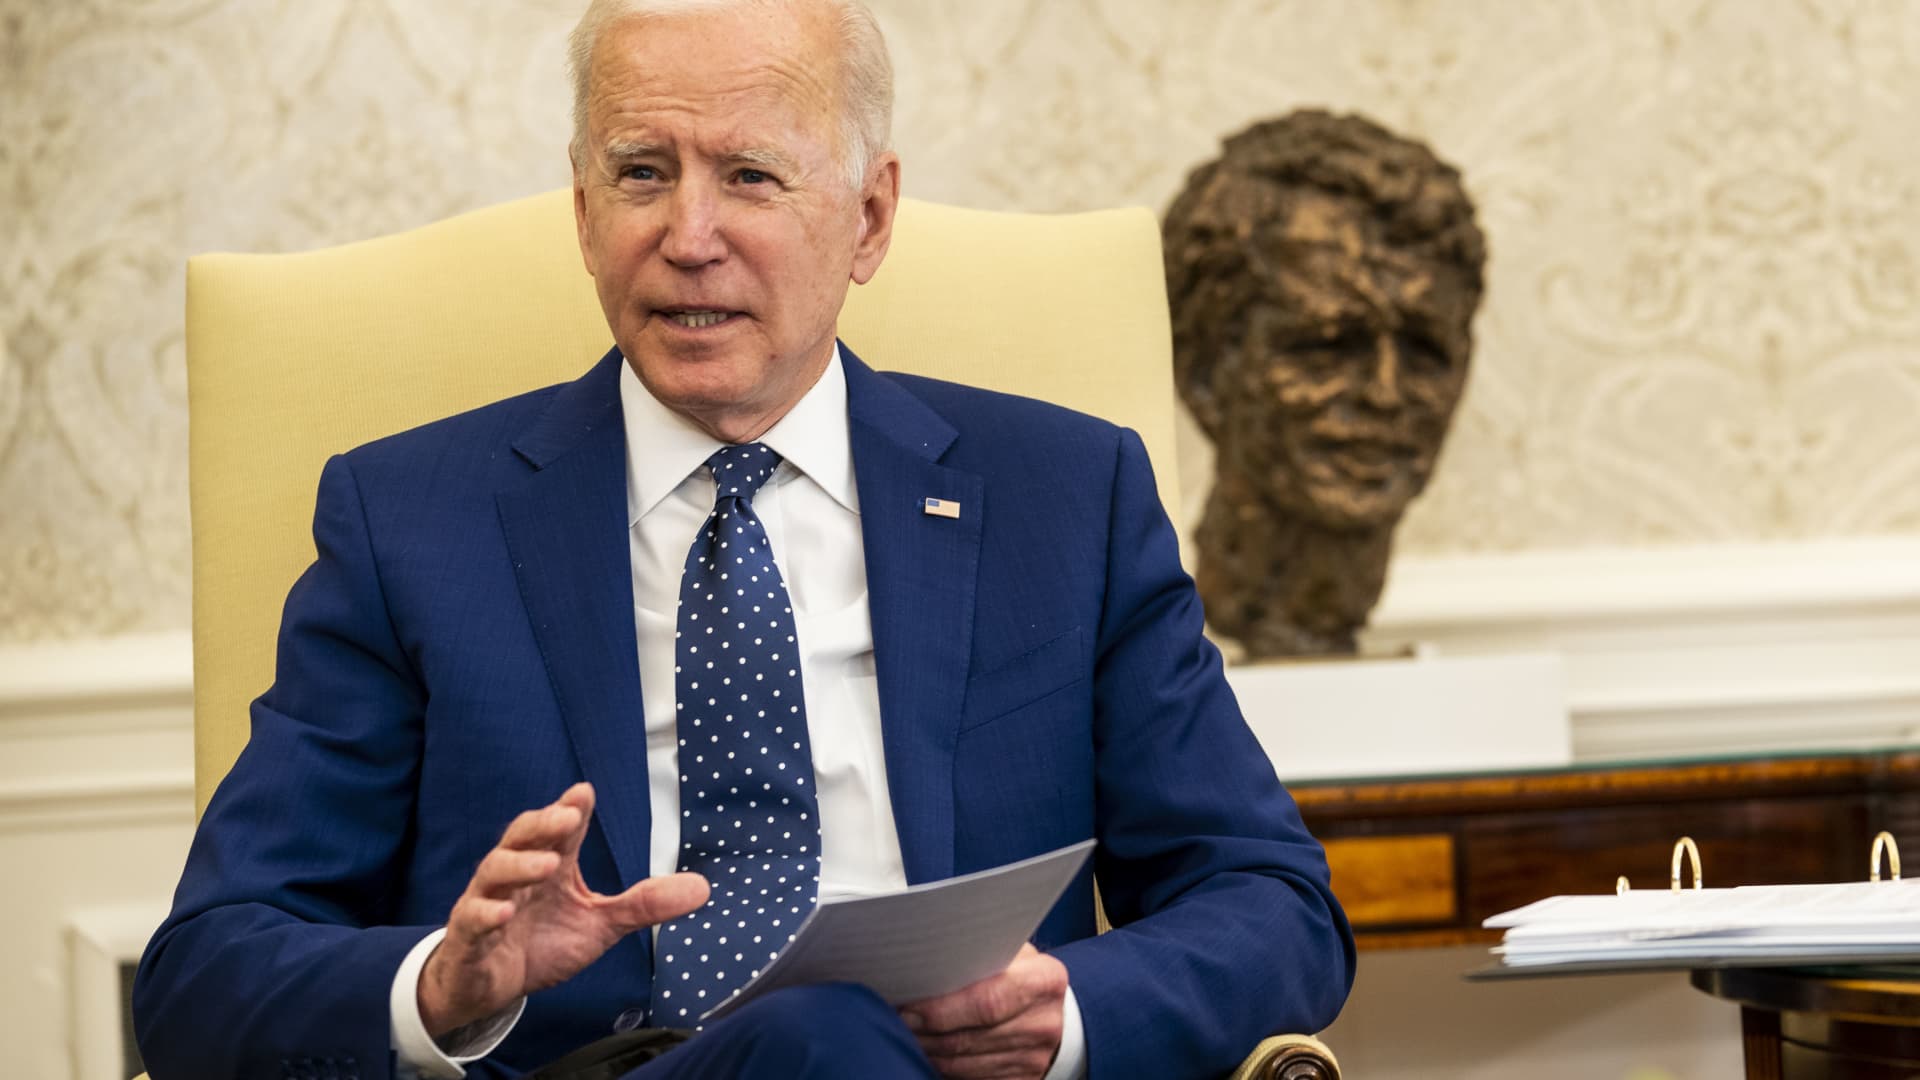 U.S. President Joe Biden speaks during a meeting with the Congressional Asian Pacific American Caucus Executive Committee in the Oval Office of the White House in Washington, D.C., on Thursday, April 15, 2021.